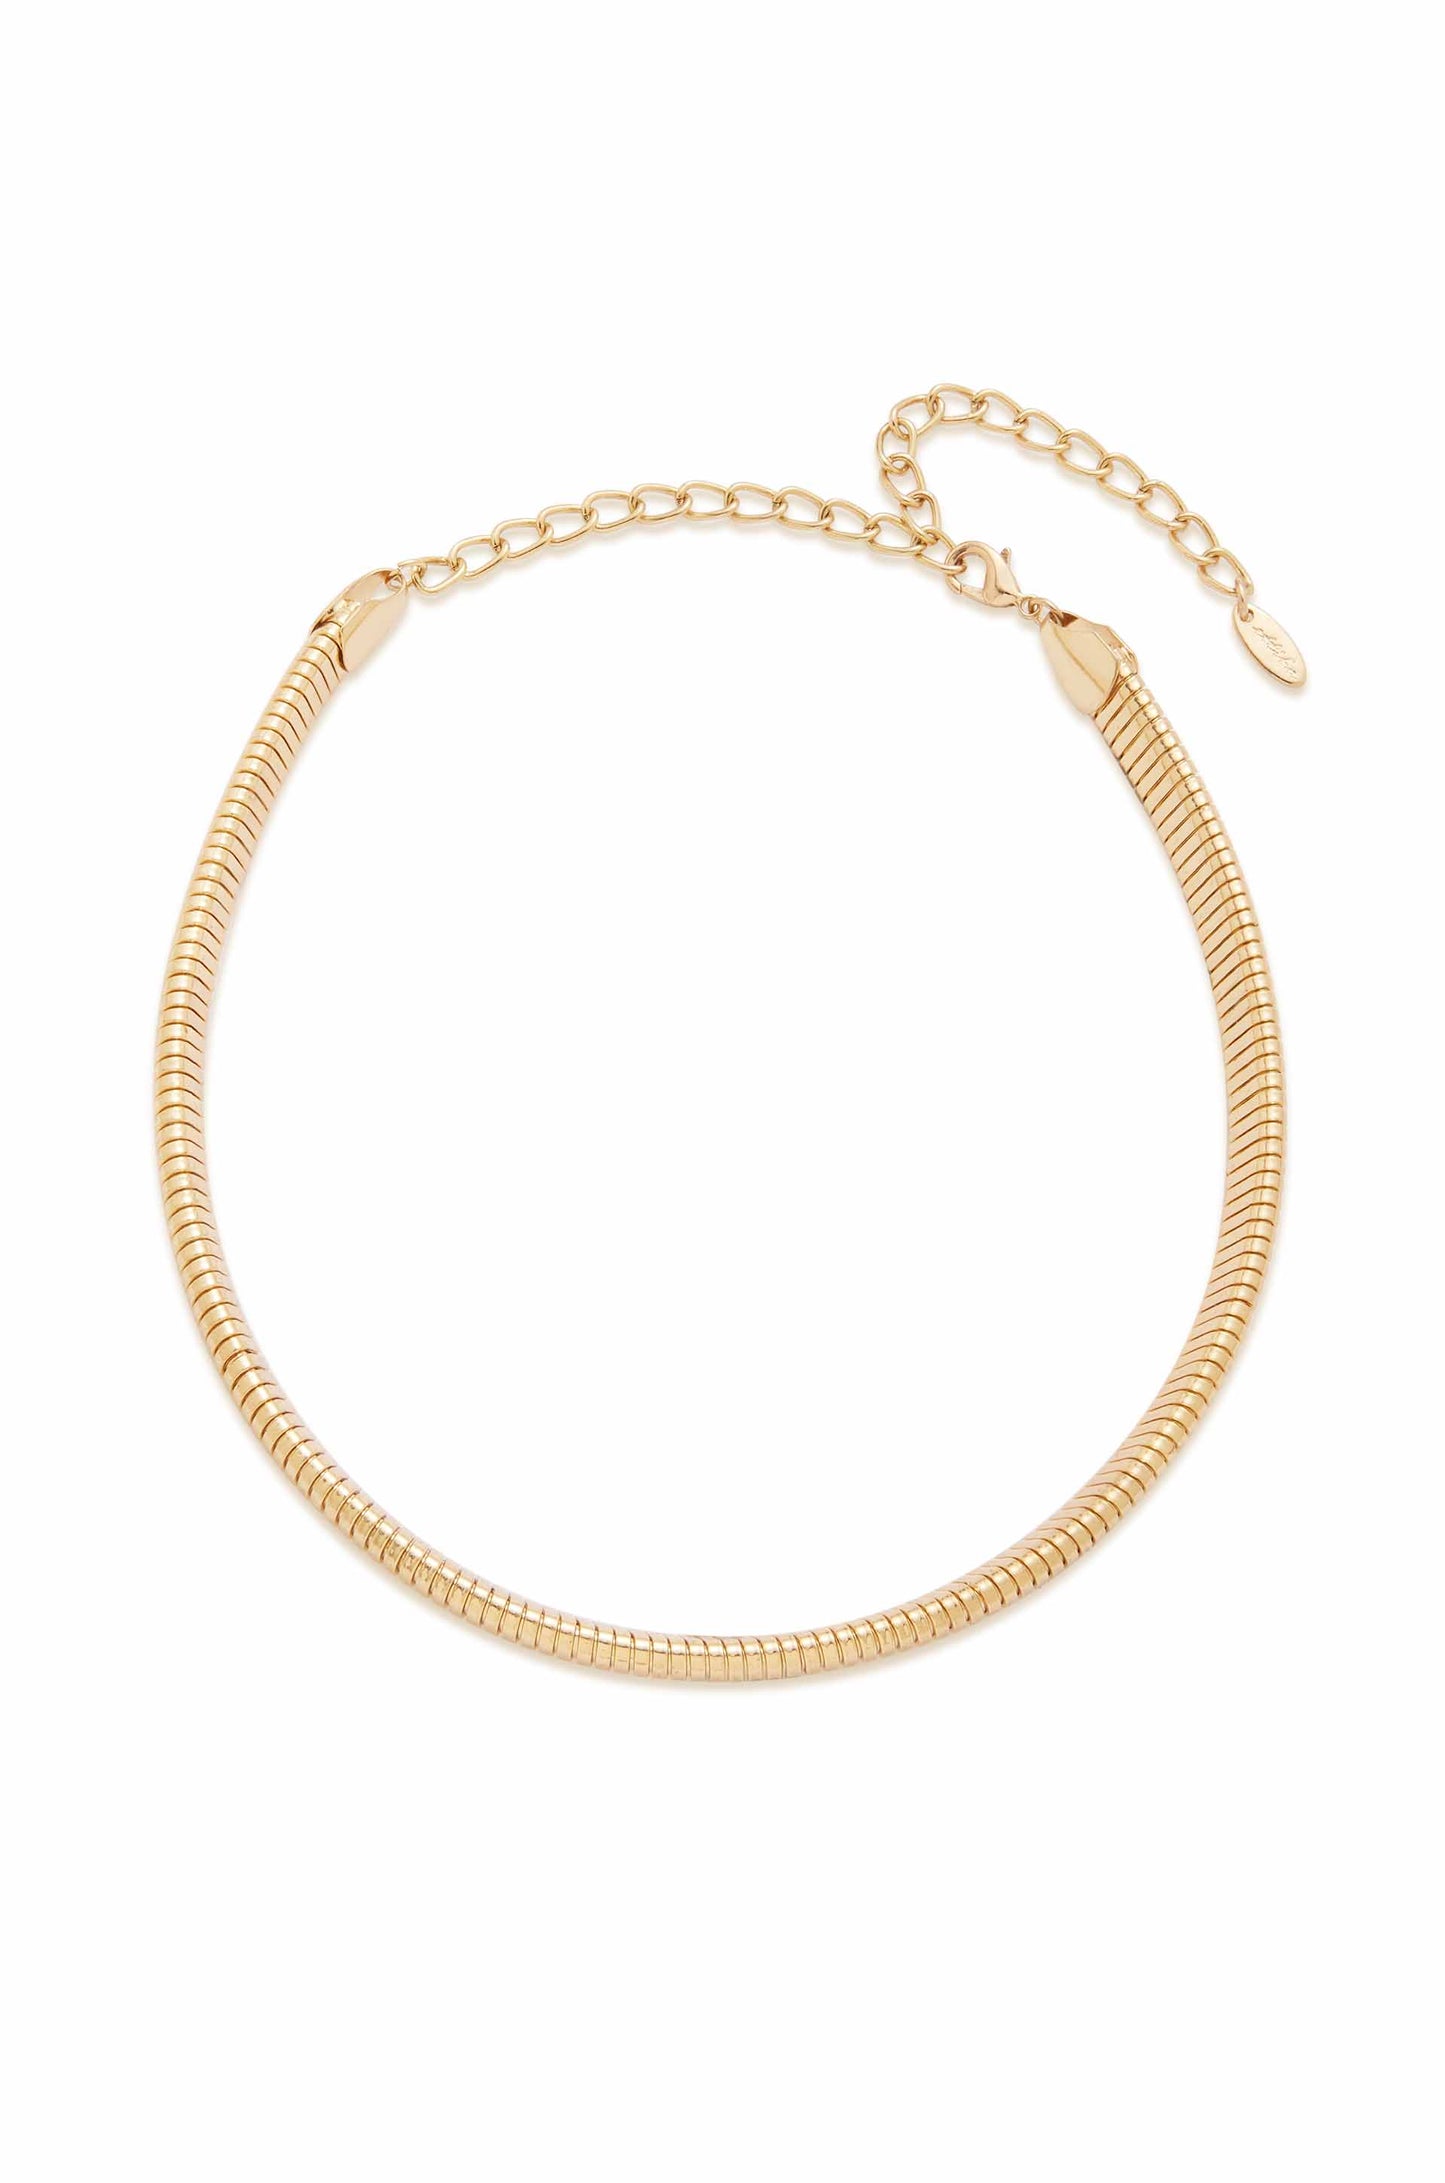 Your Essential Flex Snake Chain 18k Gold Plated Necklace on model